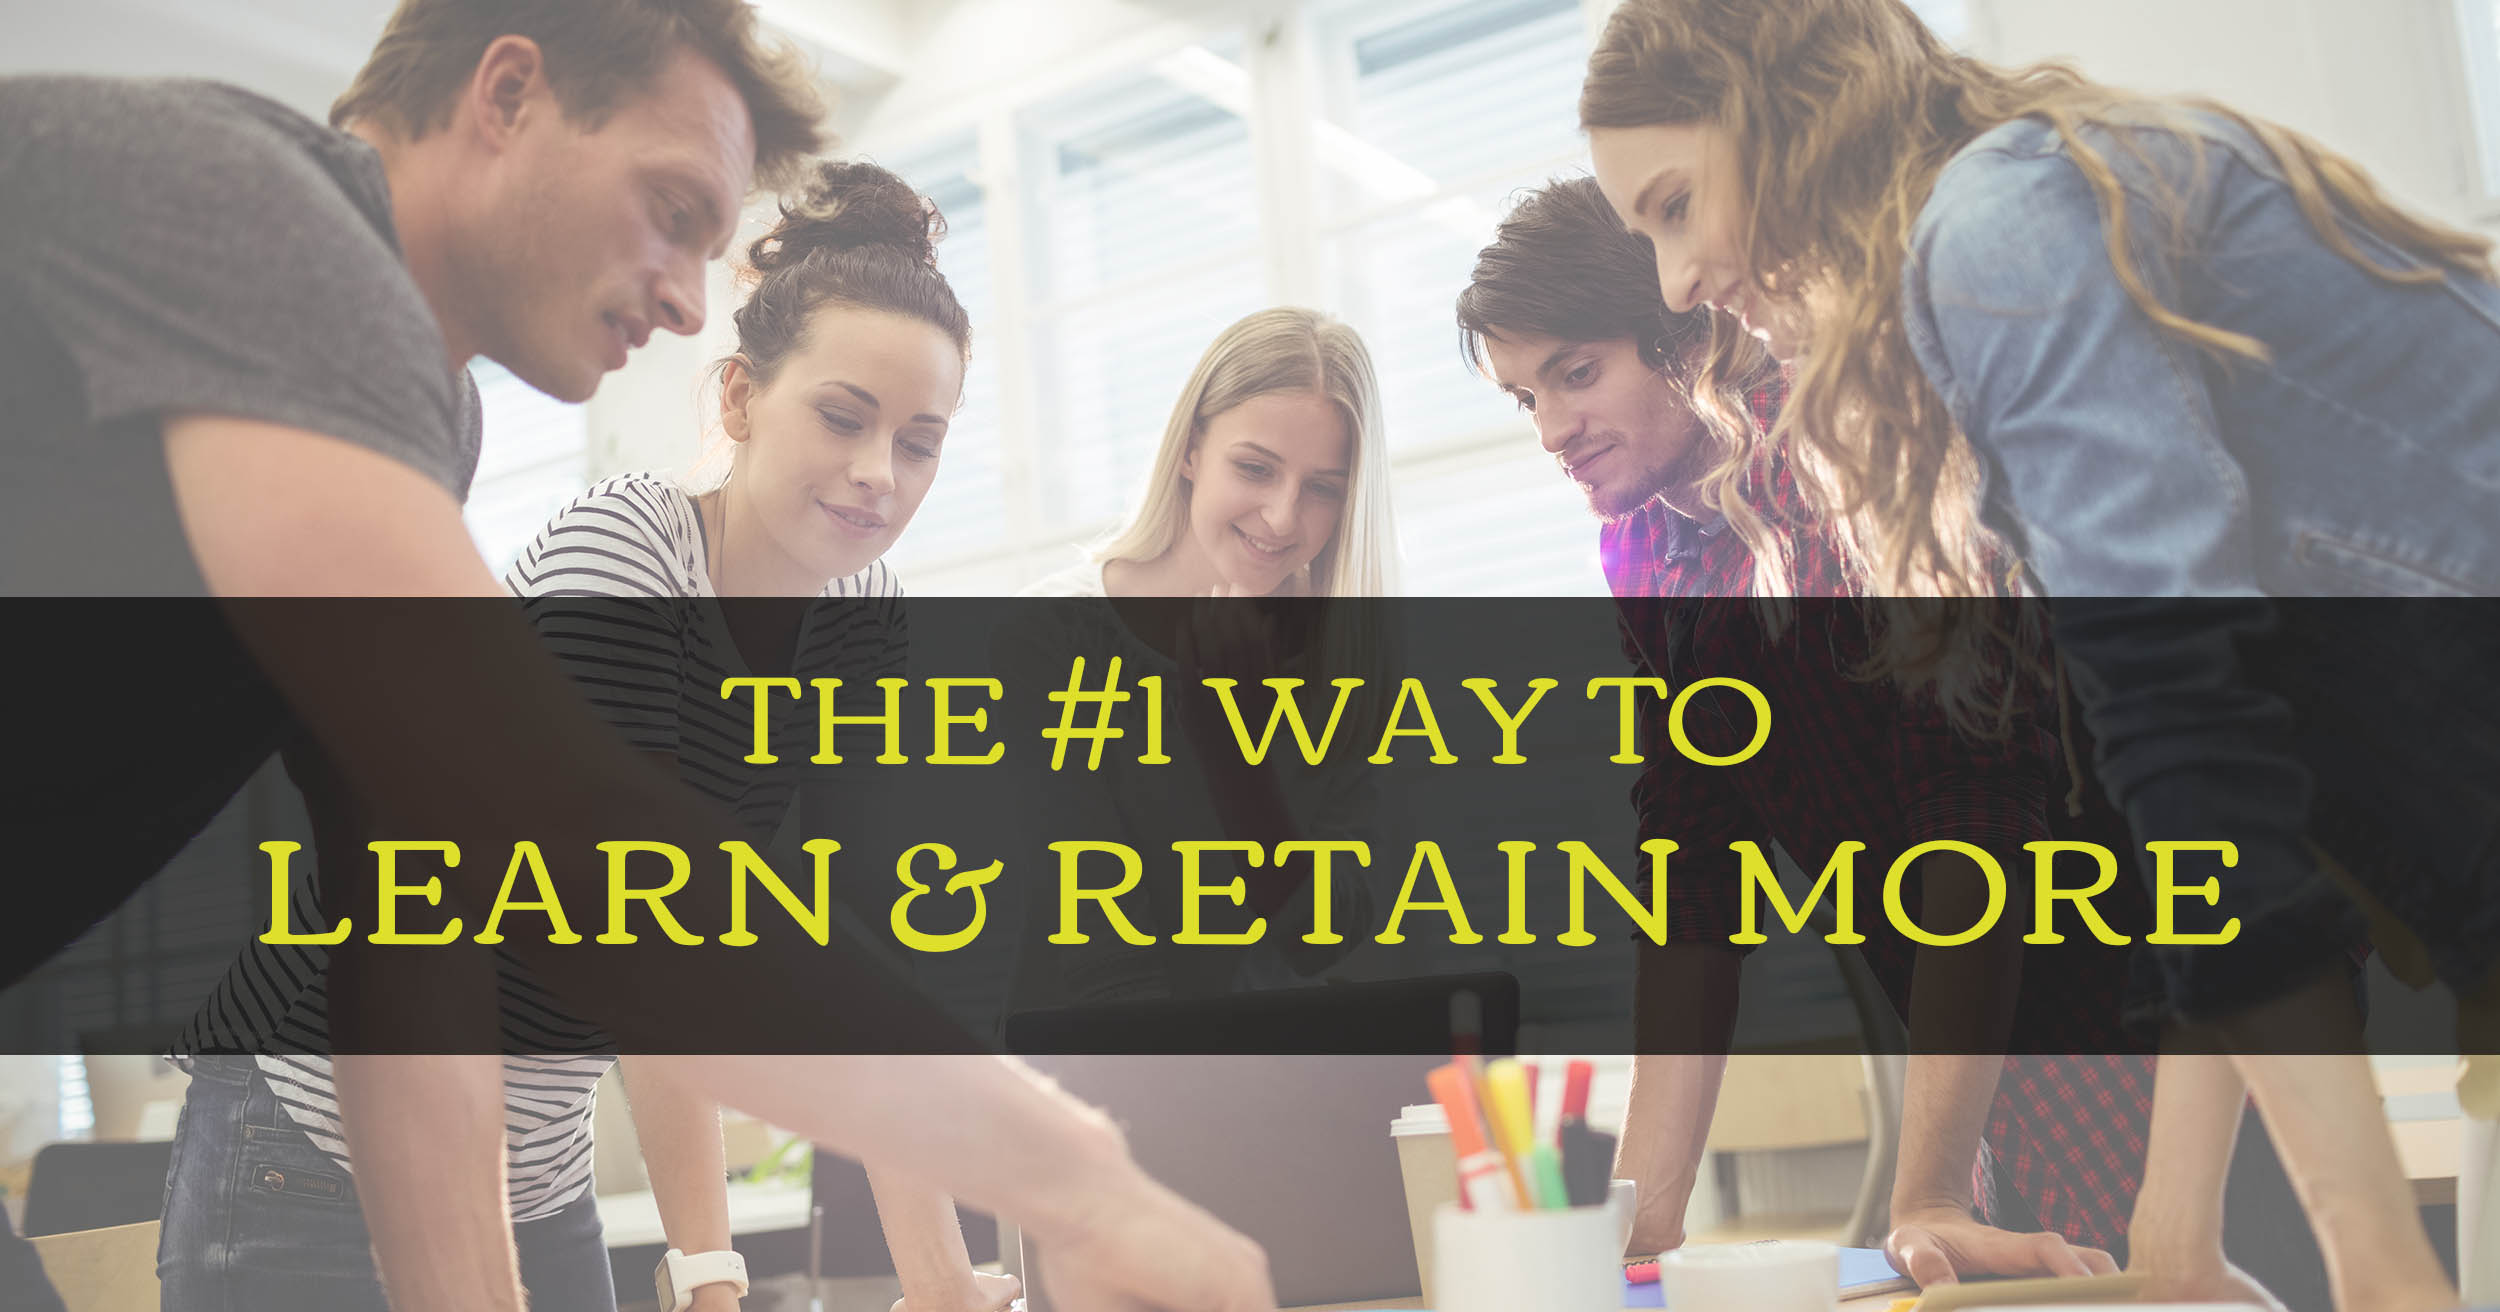 The #1 Way to Learn & Retain More